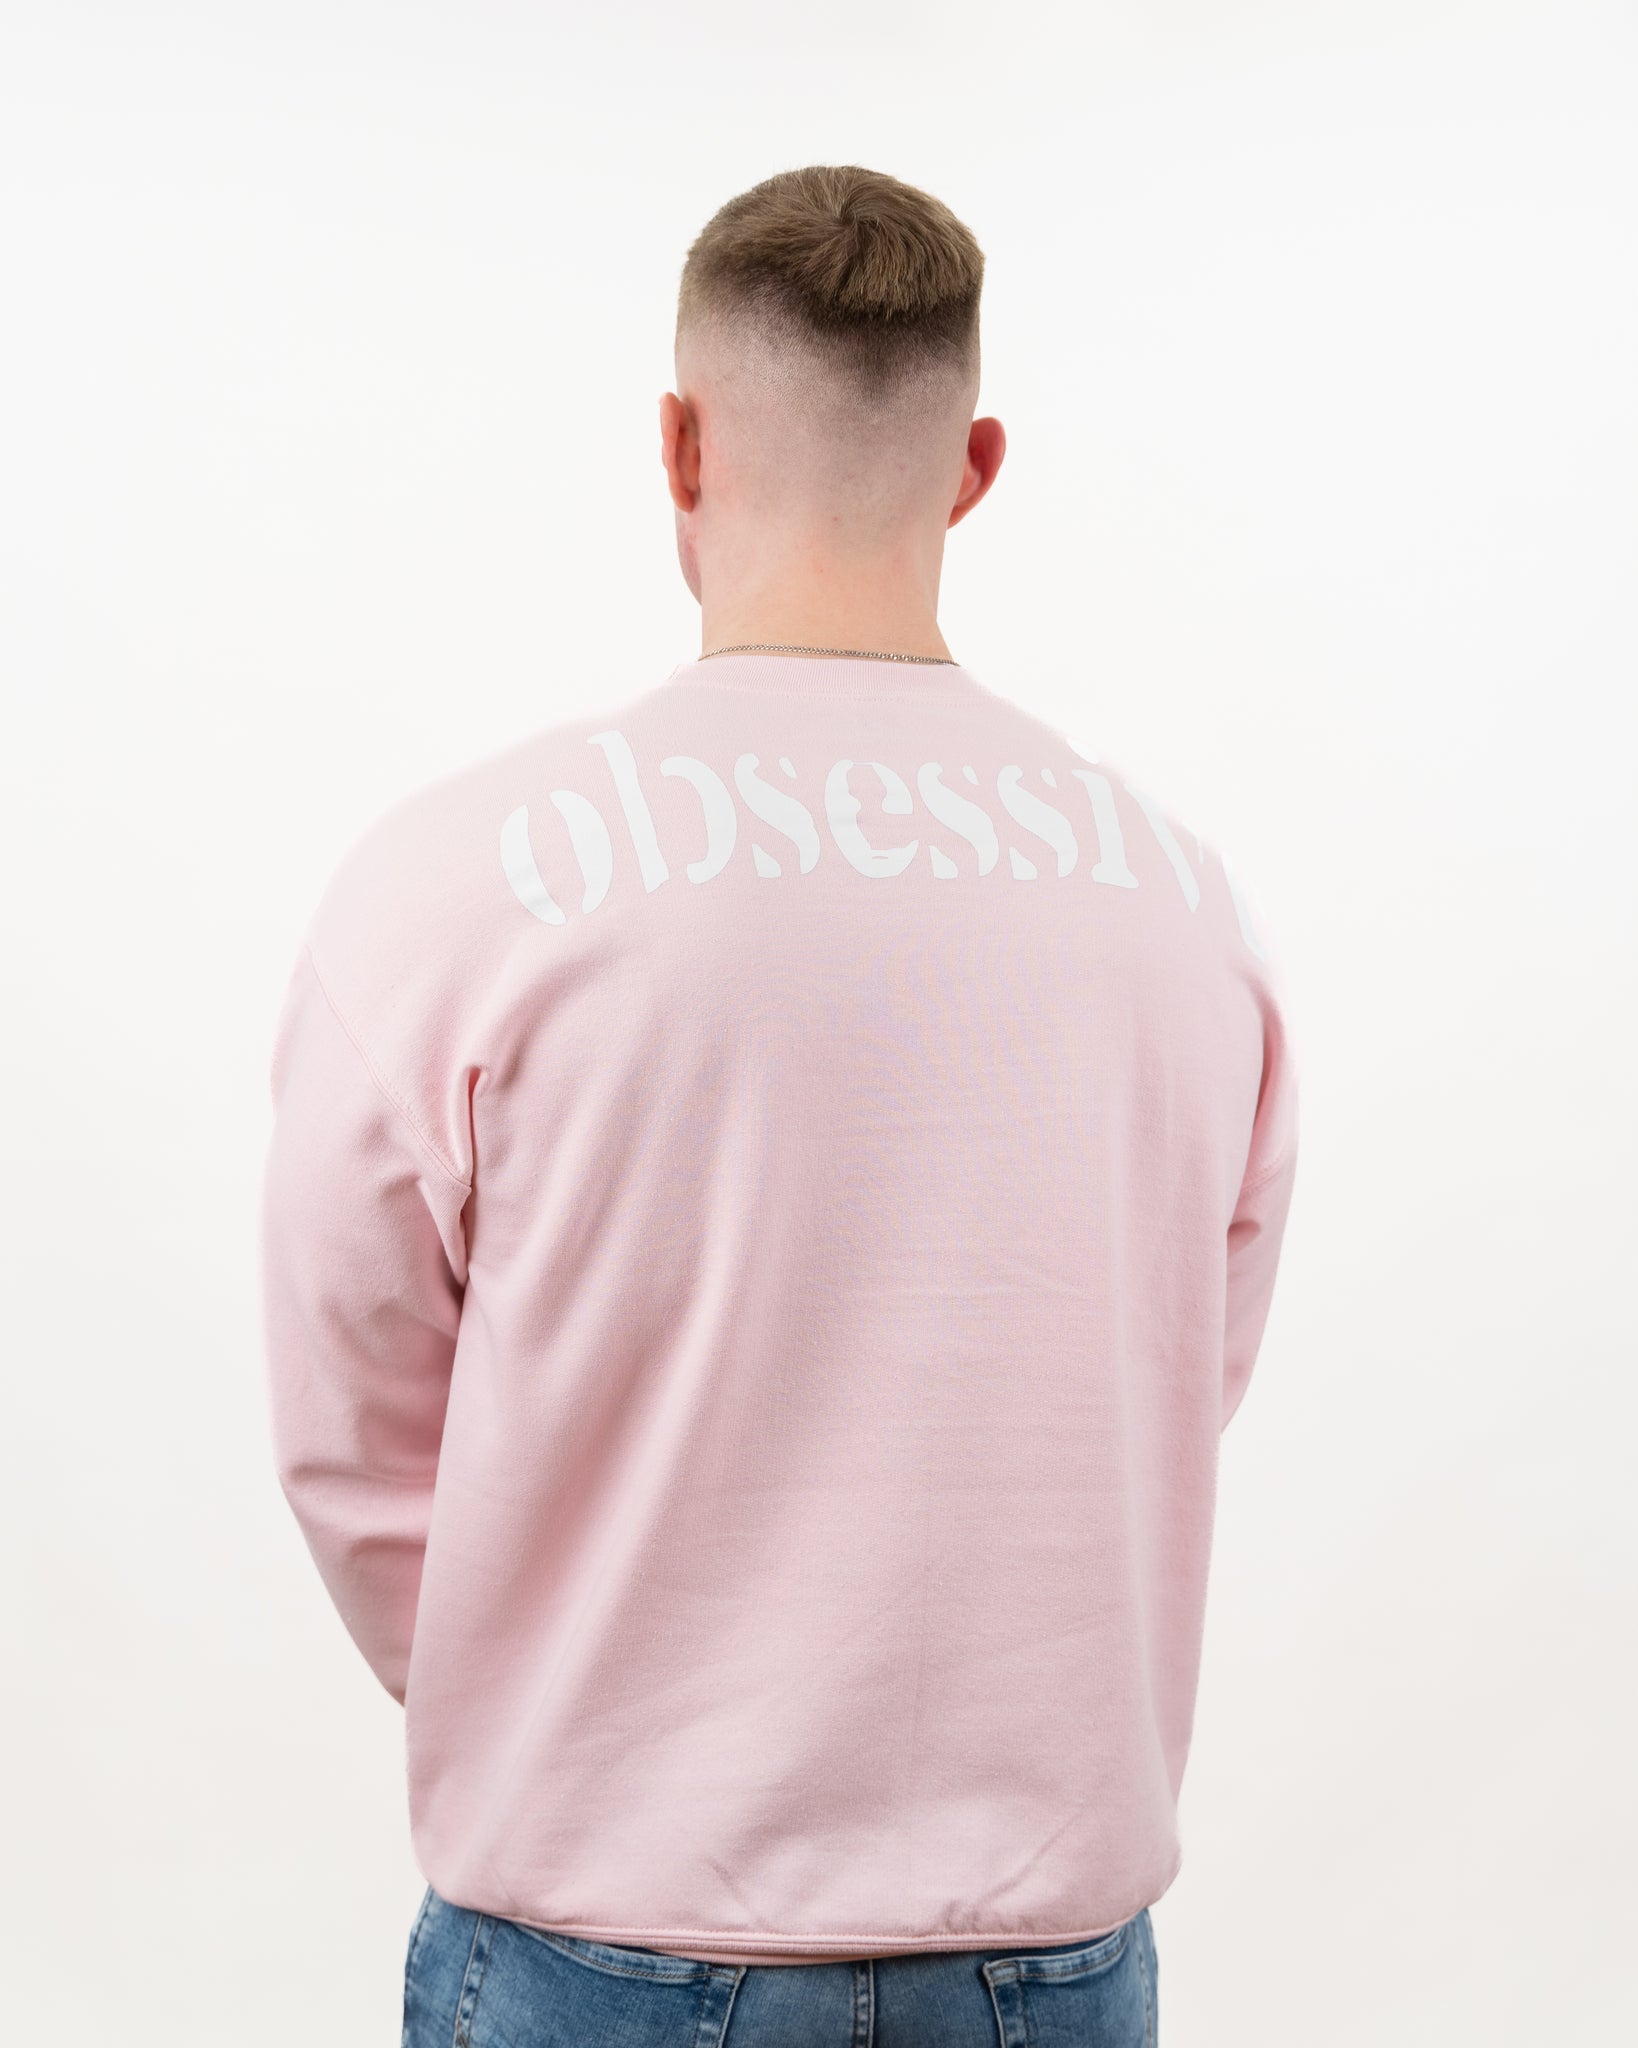 Obsessive Sweater - Light Pink